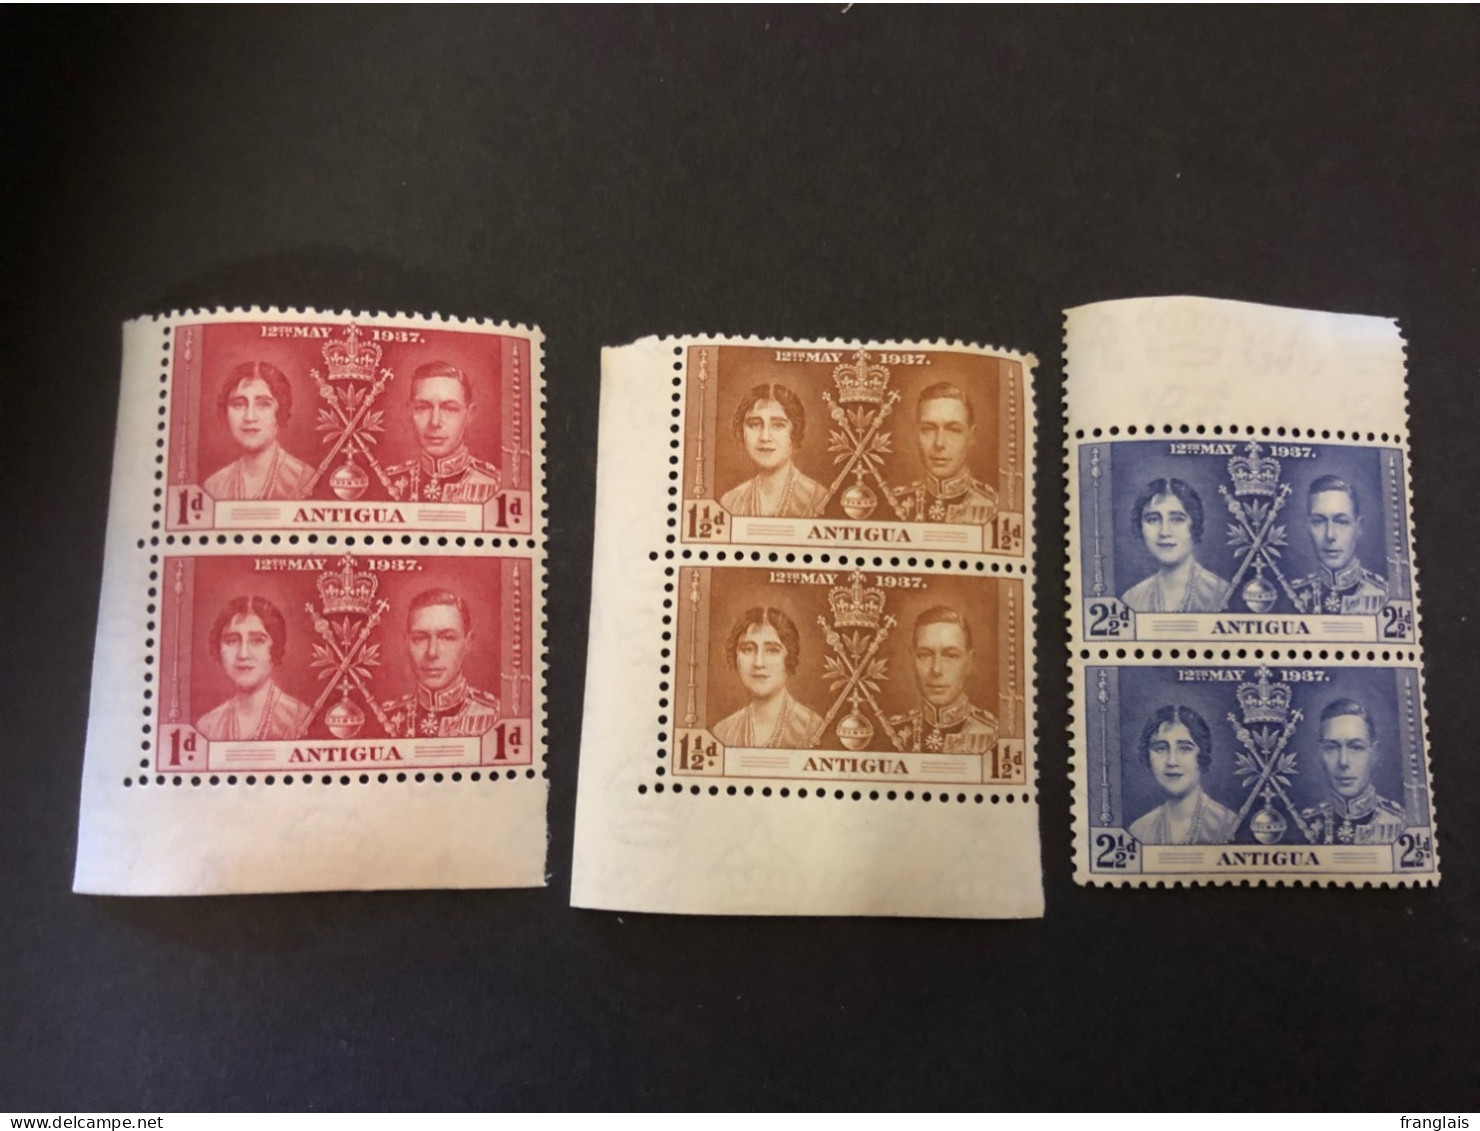 1937 CORONATION SET IN UNMOUNTED MINT PAIRS Very Fresh Condition - 1858-1960 Crown Colony